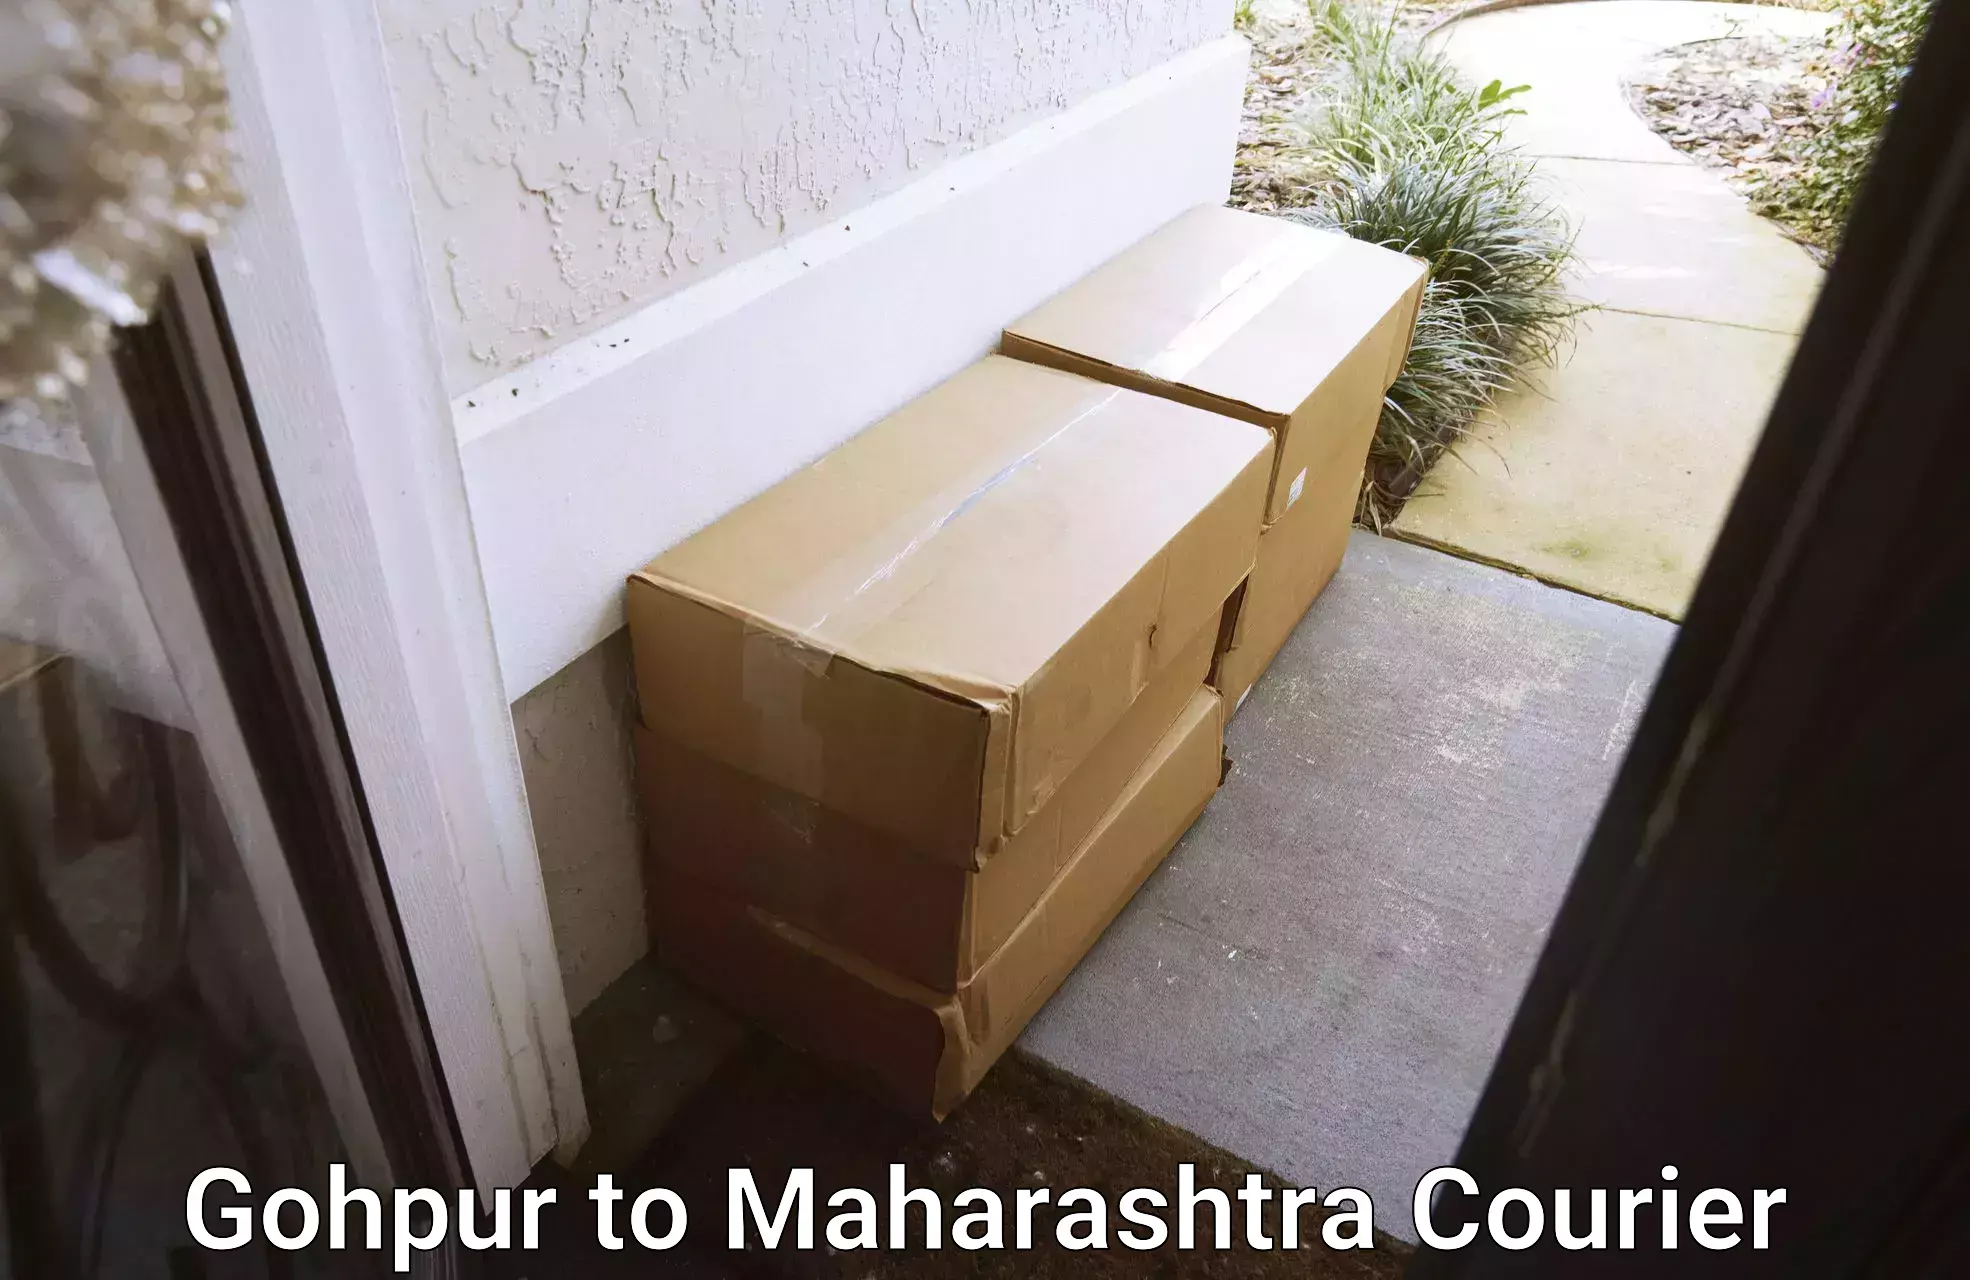 Nationwide delivery network Gohpur to Maharashtra